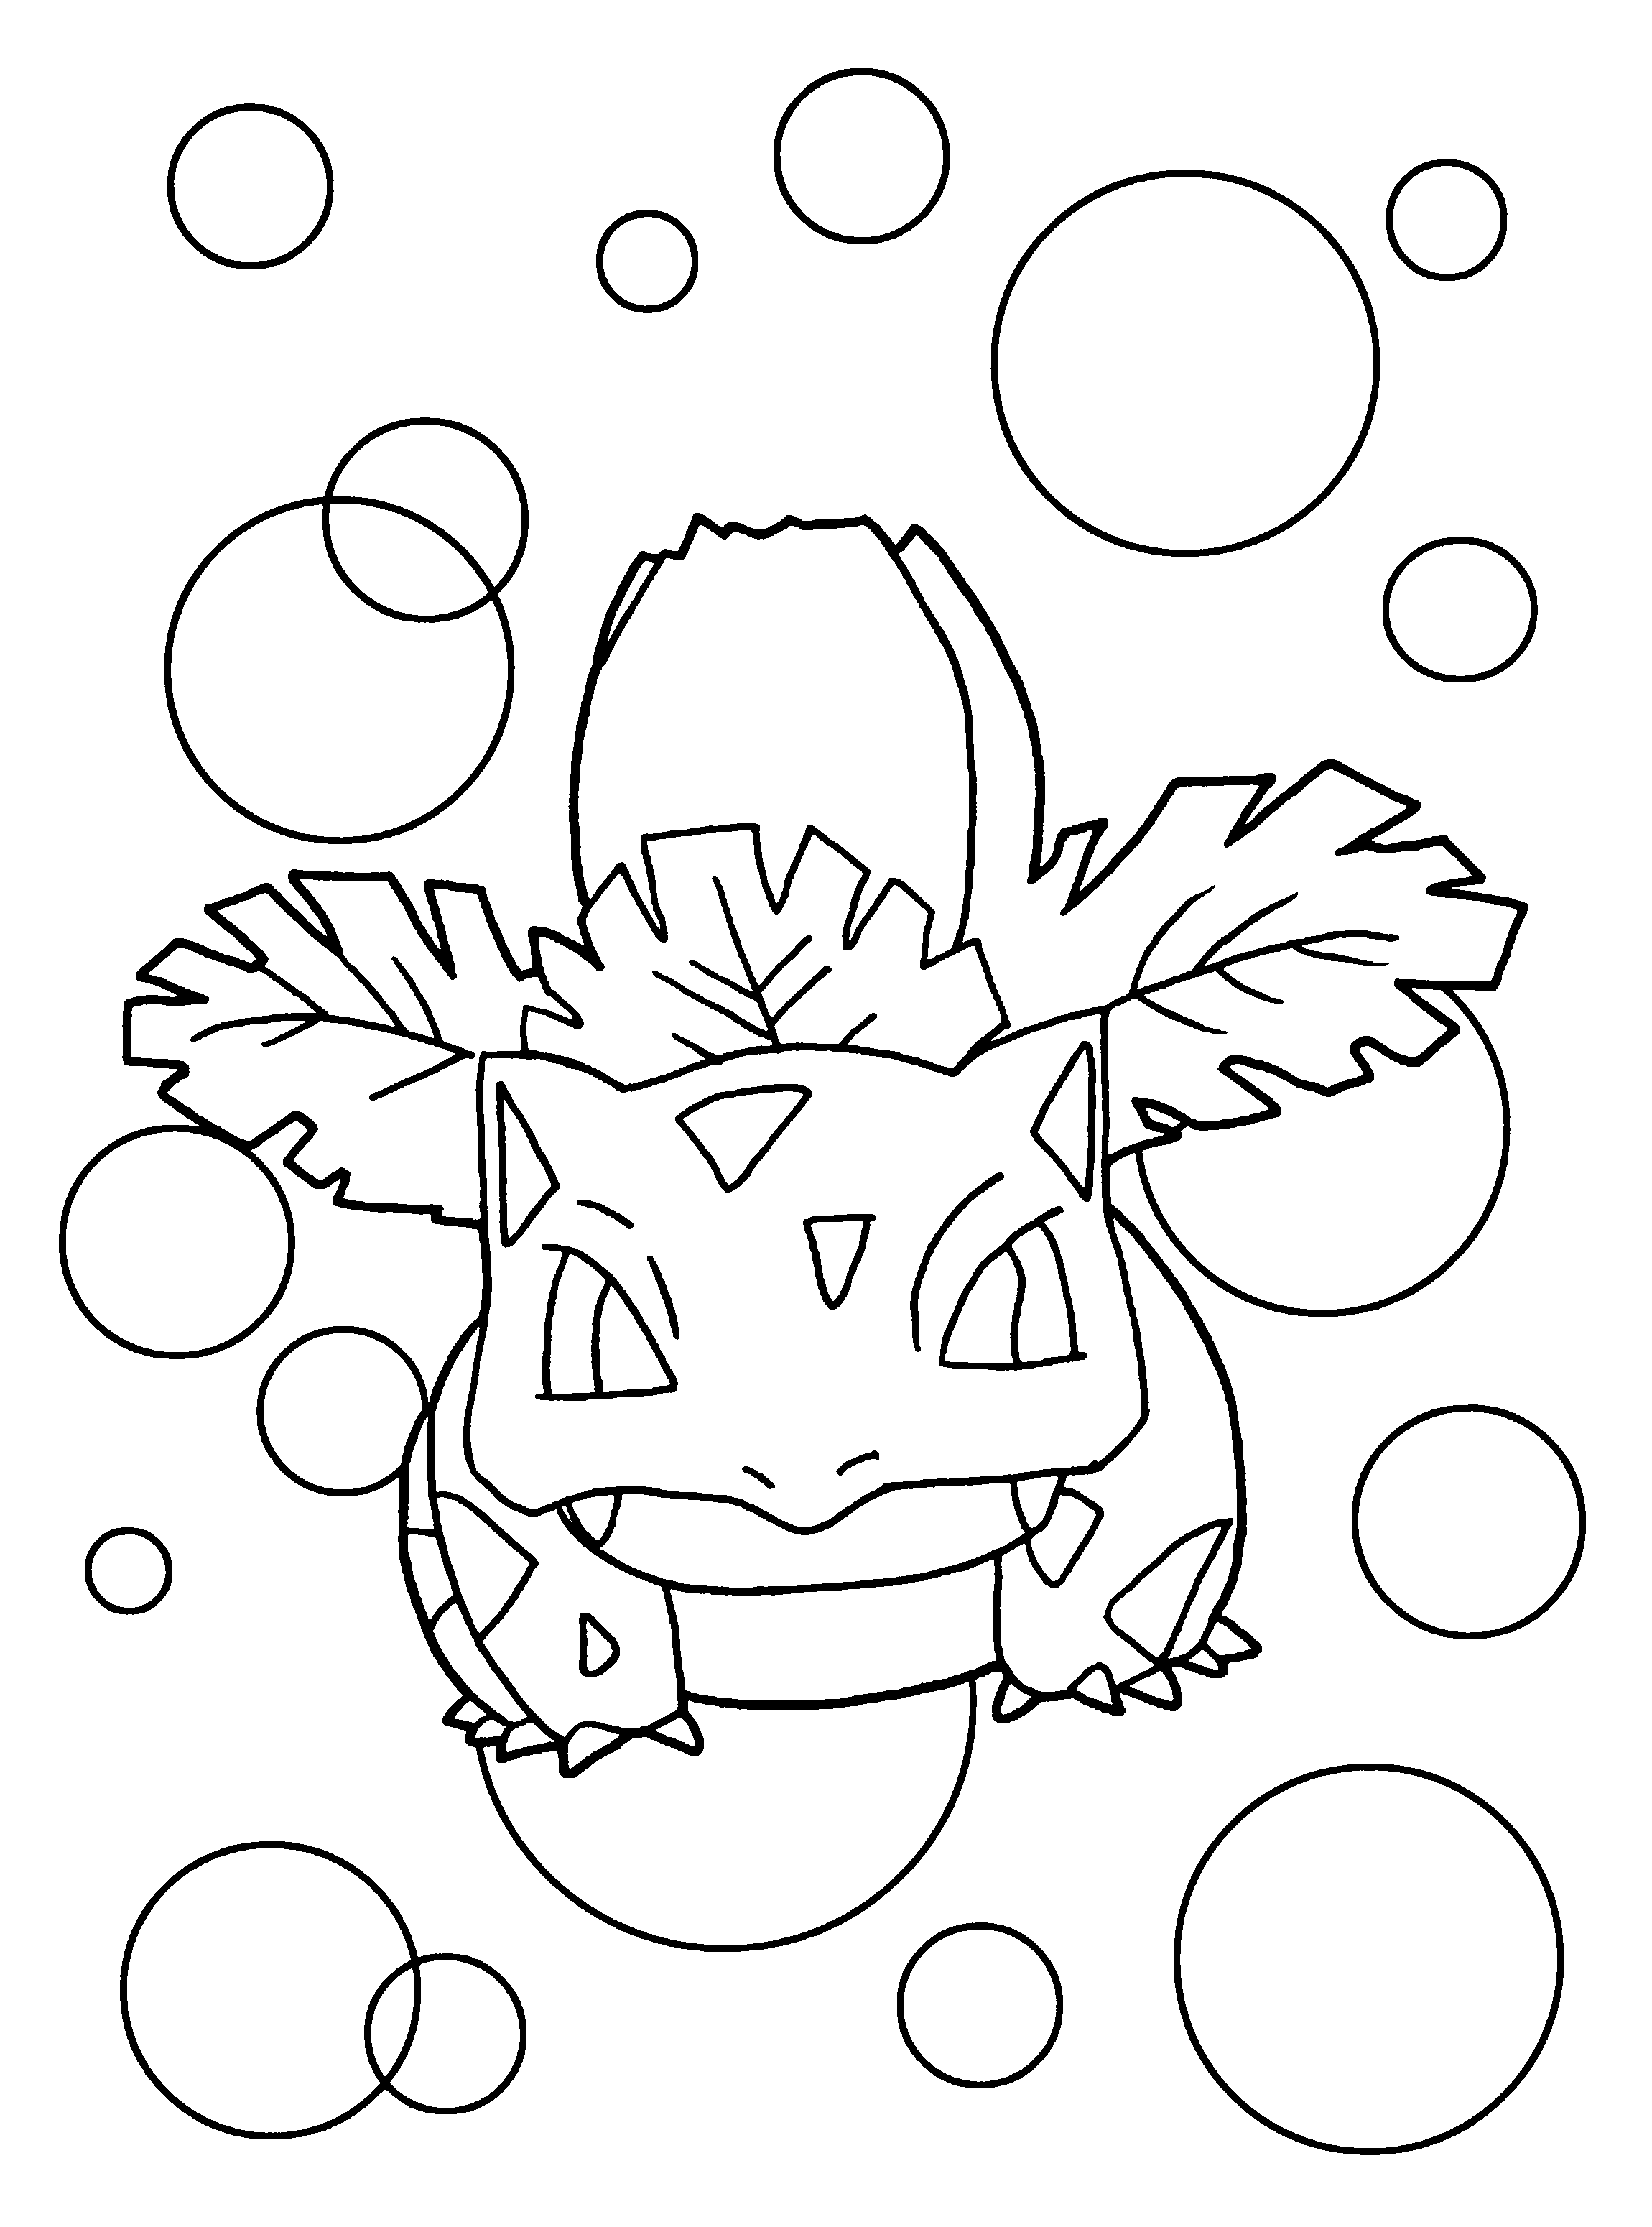 200 Eevee Coloring Pages: Evolve Your Art Skills 147